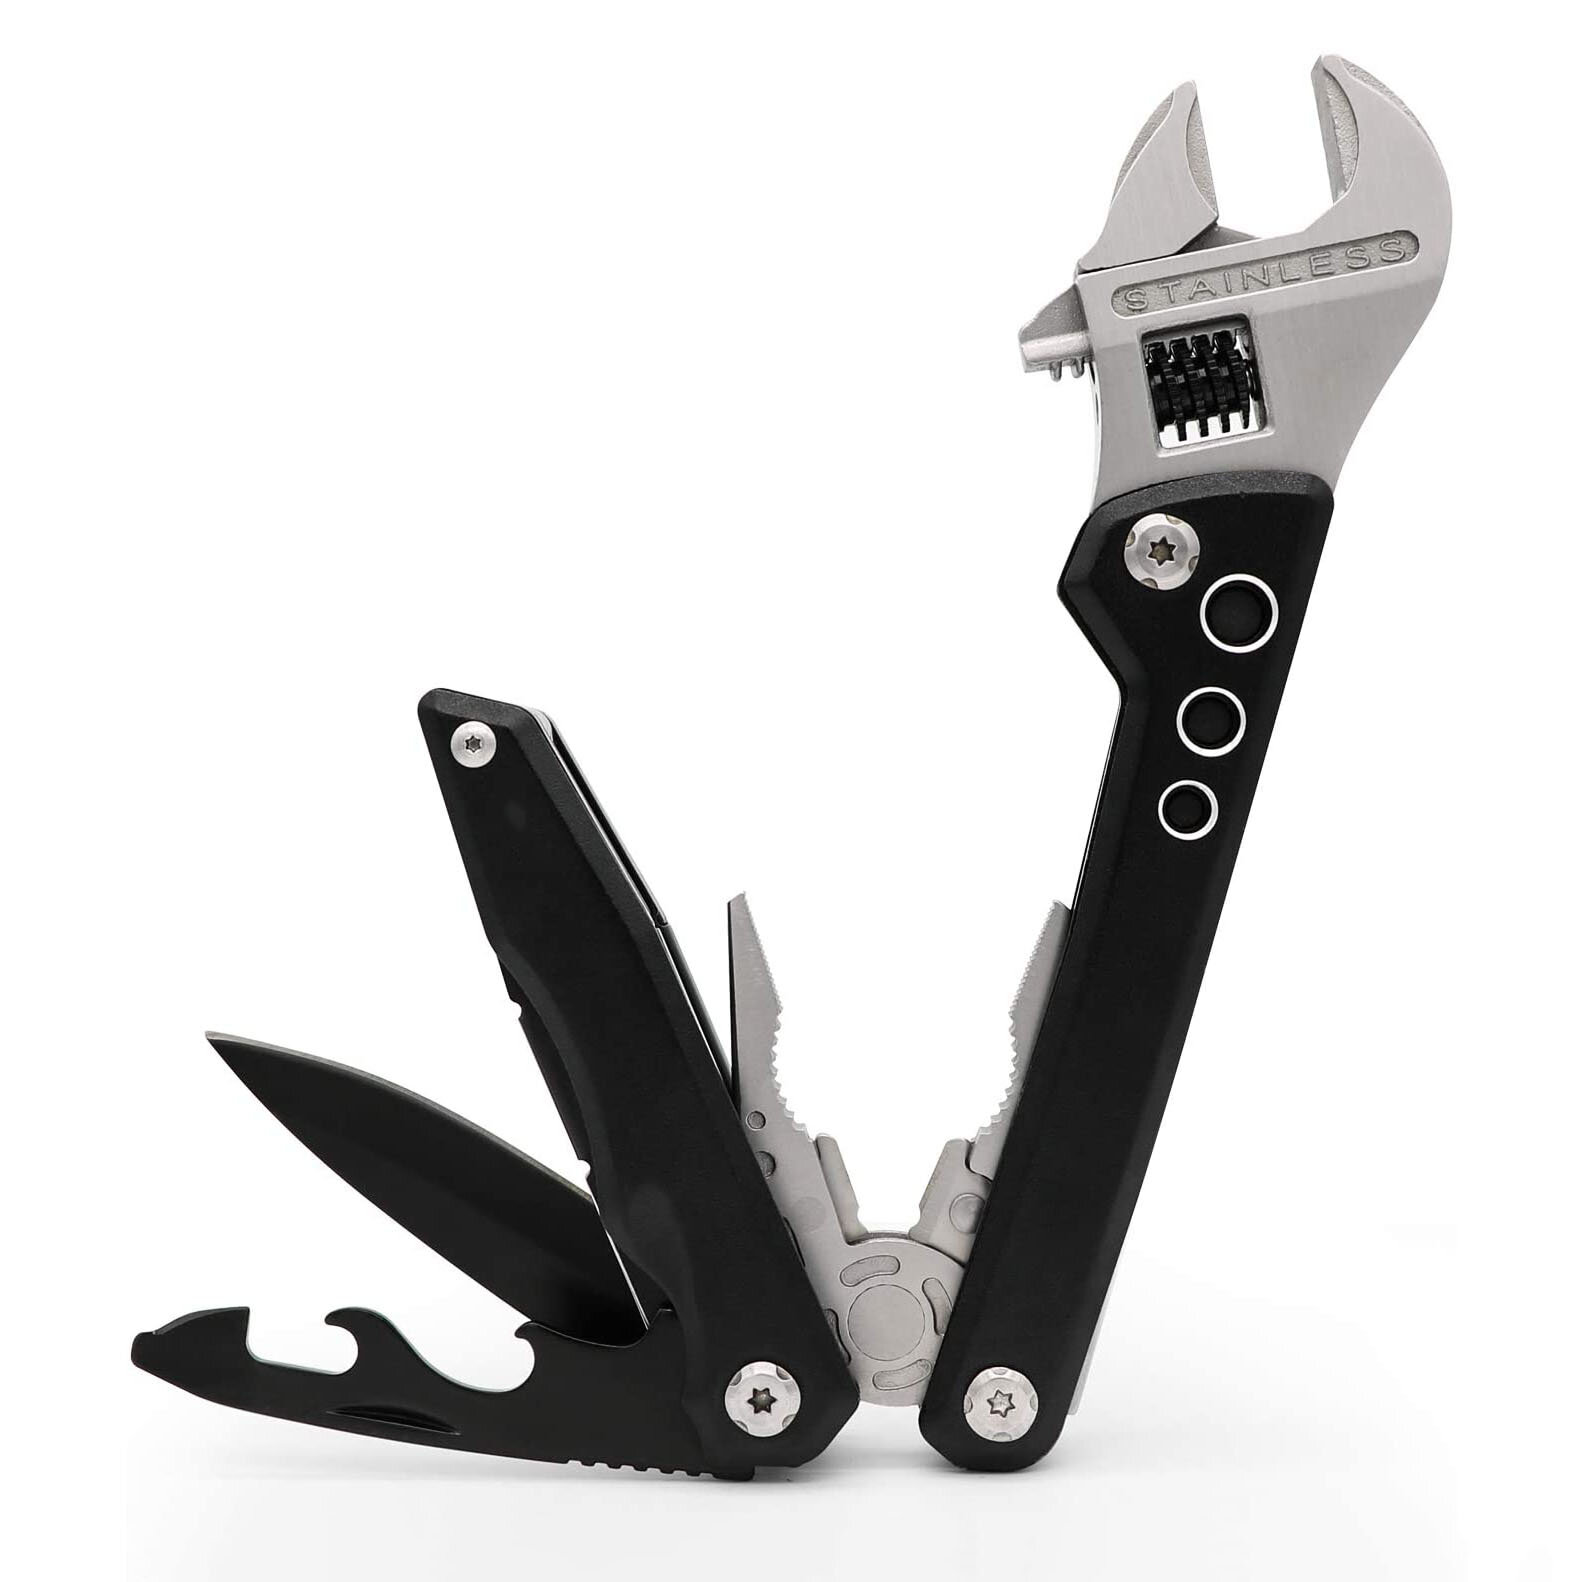 HUOHOU 7 in 1 Folding Multifunction Tool Adjustable Spanner Multi Tool with Screwdriver Plier Wire Cutter Knife Bottle O